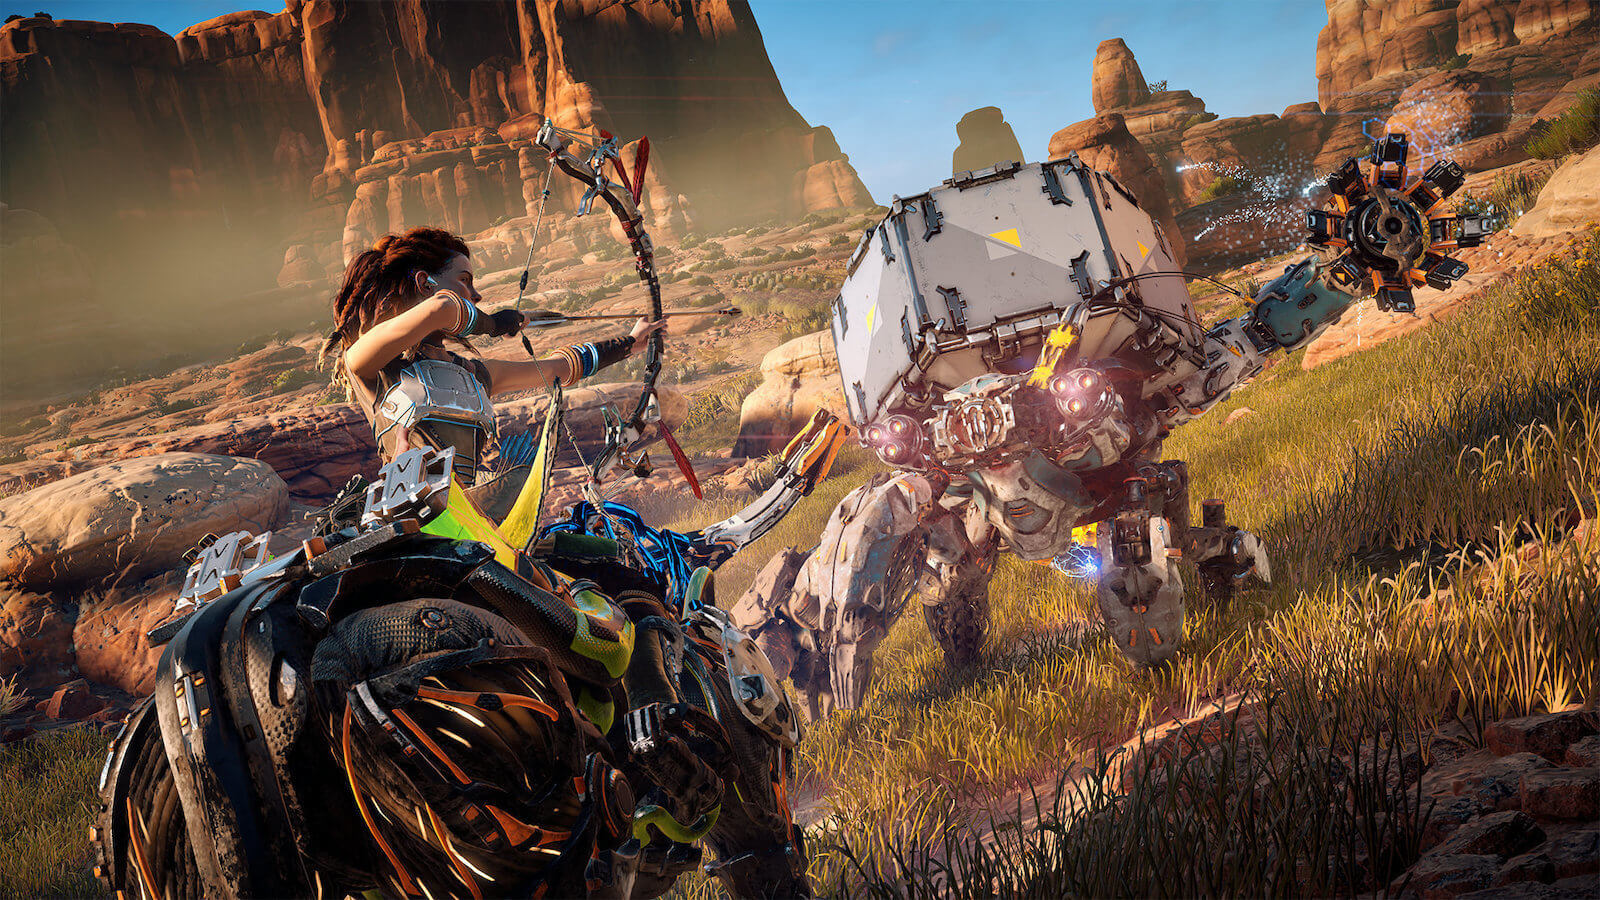 Horizon Zero Dawn Drops On Steam And Epic Game Store This August; System Requirements, New FAQs, Improved Reflections